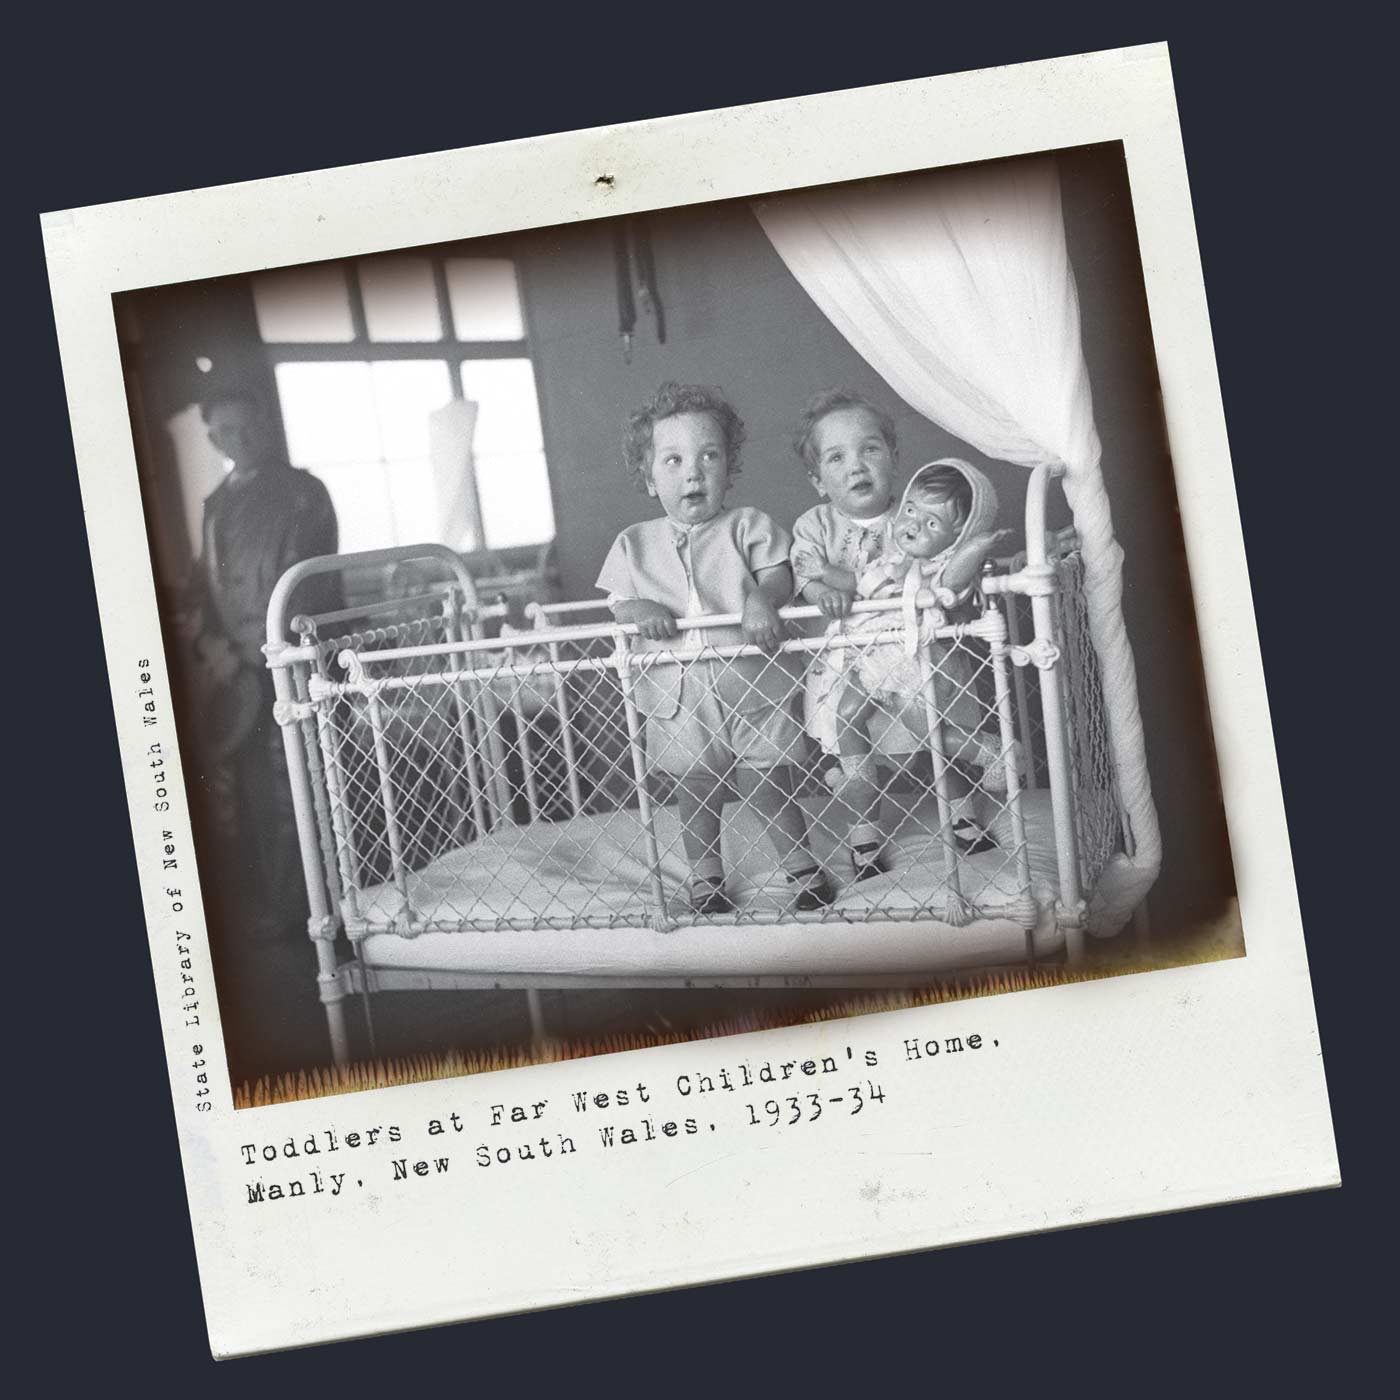 A black and white Polaroid photograph of two small children in a metal cot. The children are standing facing the camera and holding the raised side rail. One of them is holding a large doll. There is a man standing in the background who is looking towards the children. Typewritten text underneath reads 'Toddlers at Far West Children's Home. Manly. New South Wales. 1933-34'. Smaller text, on the left-hand side of the image, in a vertical direction, reads 'State Library of New South Wales'. - click to view larger image